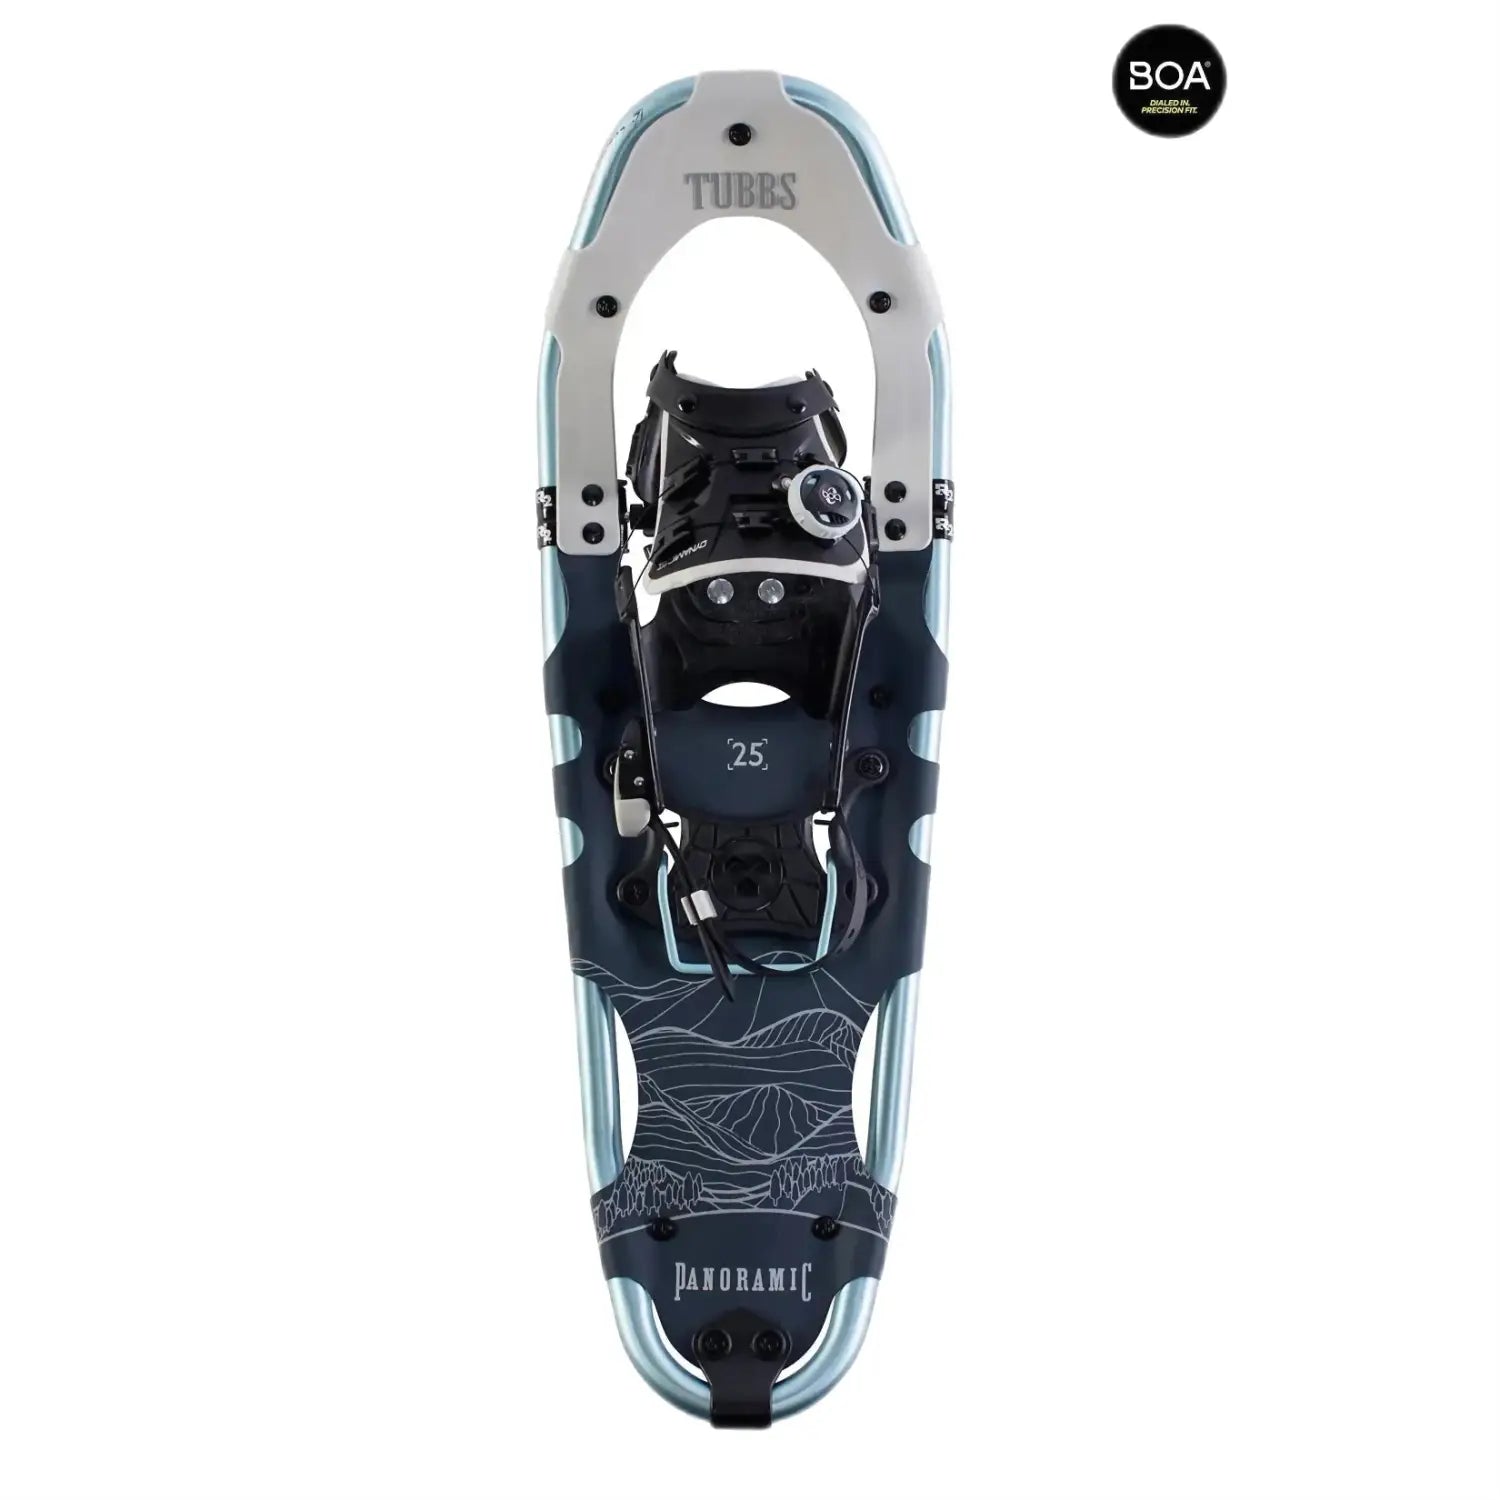 Tubbs Women's Tubbs Panoramic Snowshoes shown in the Grey/Ice Blue color option.